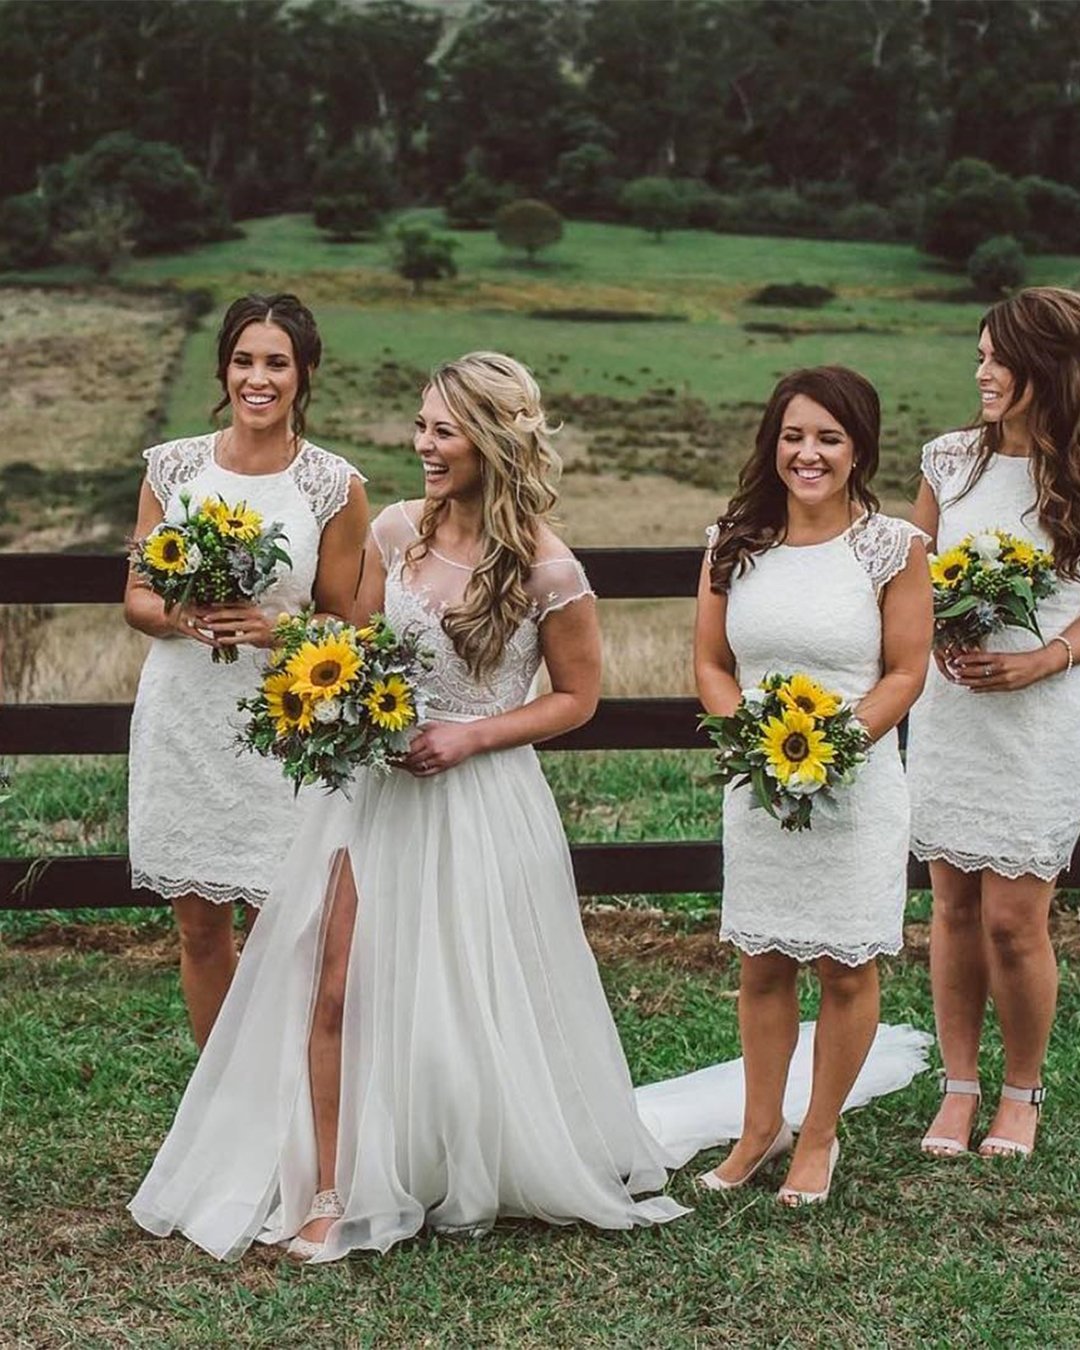 wildflower wedding bouquets with sunflowers